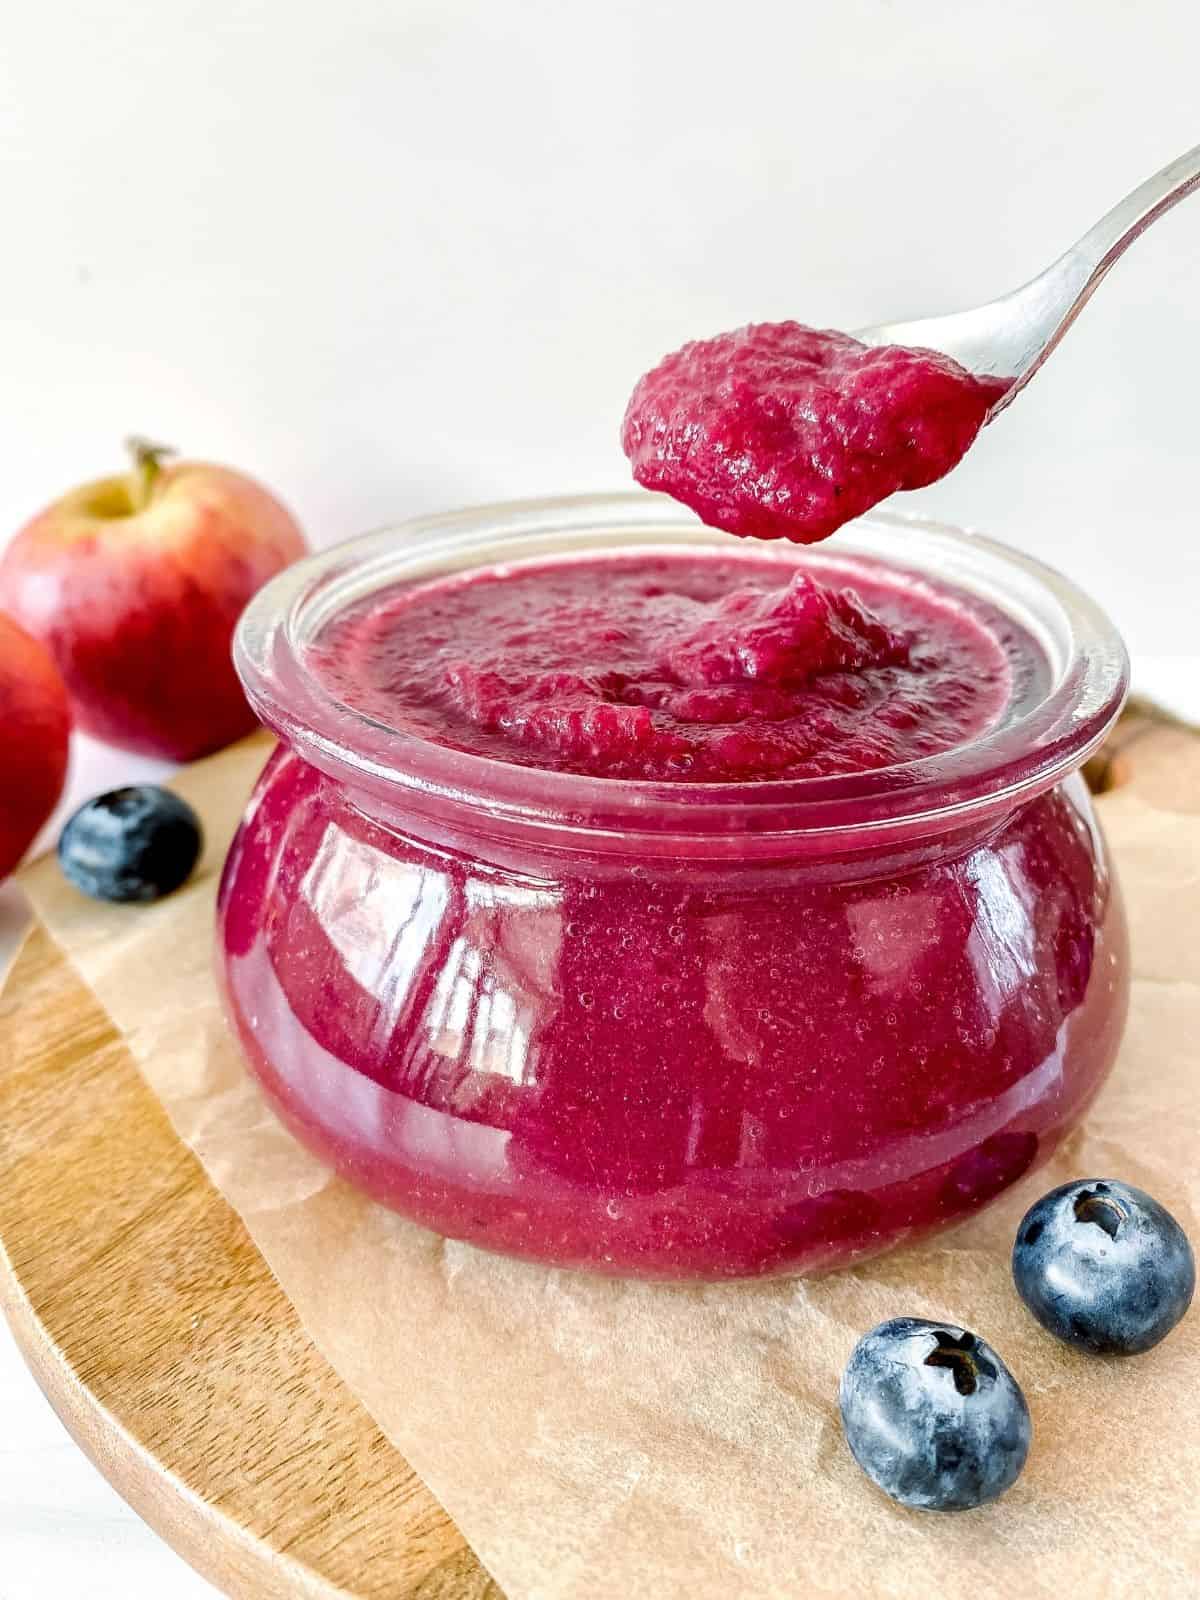 apple blueberry sauce in a glass jar with a spoonful of sauce above it and apples in the background.